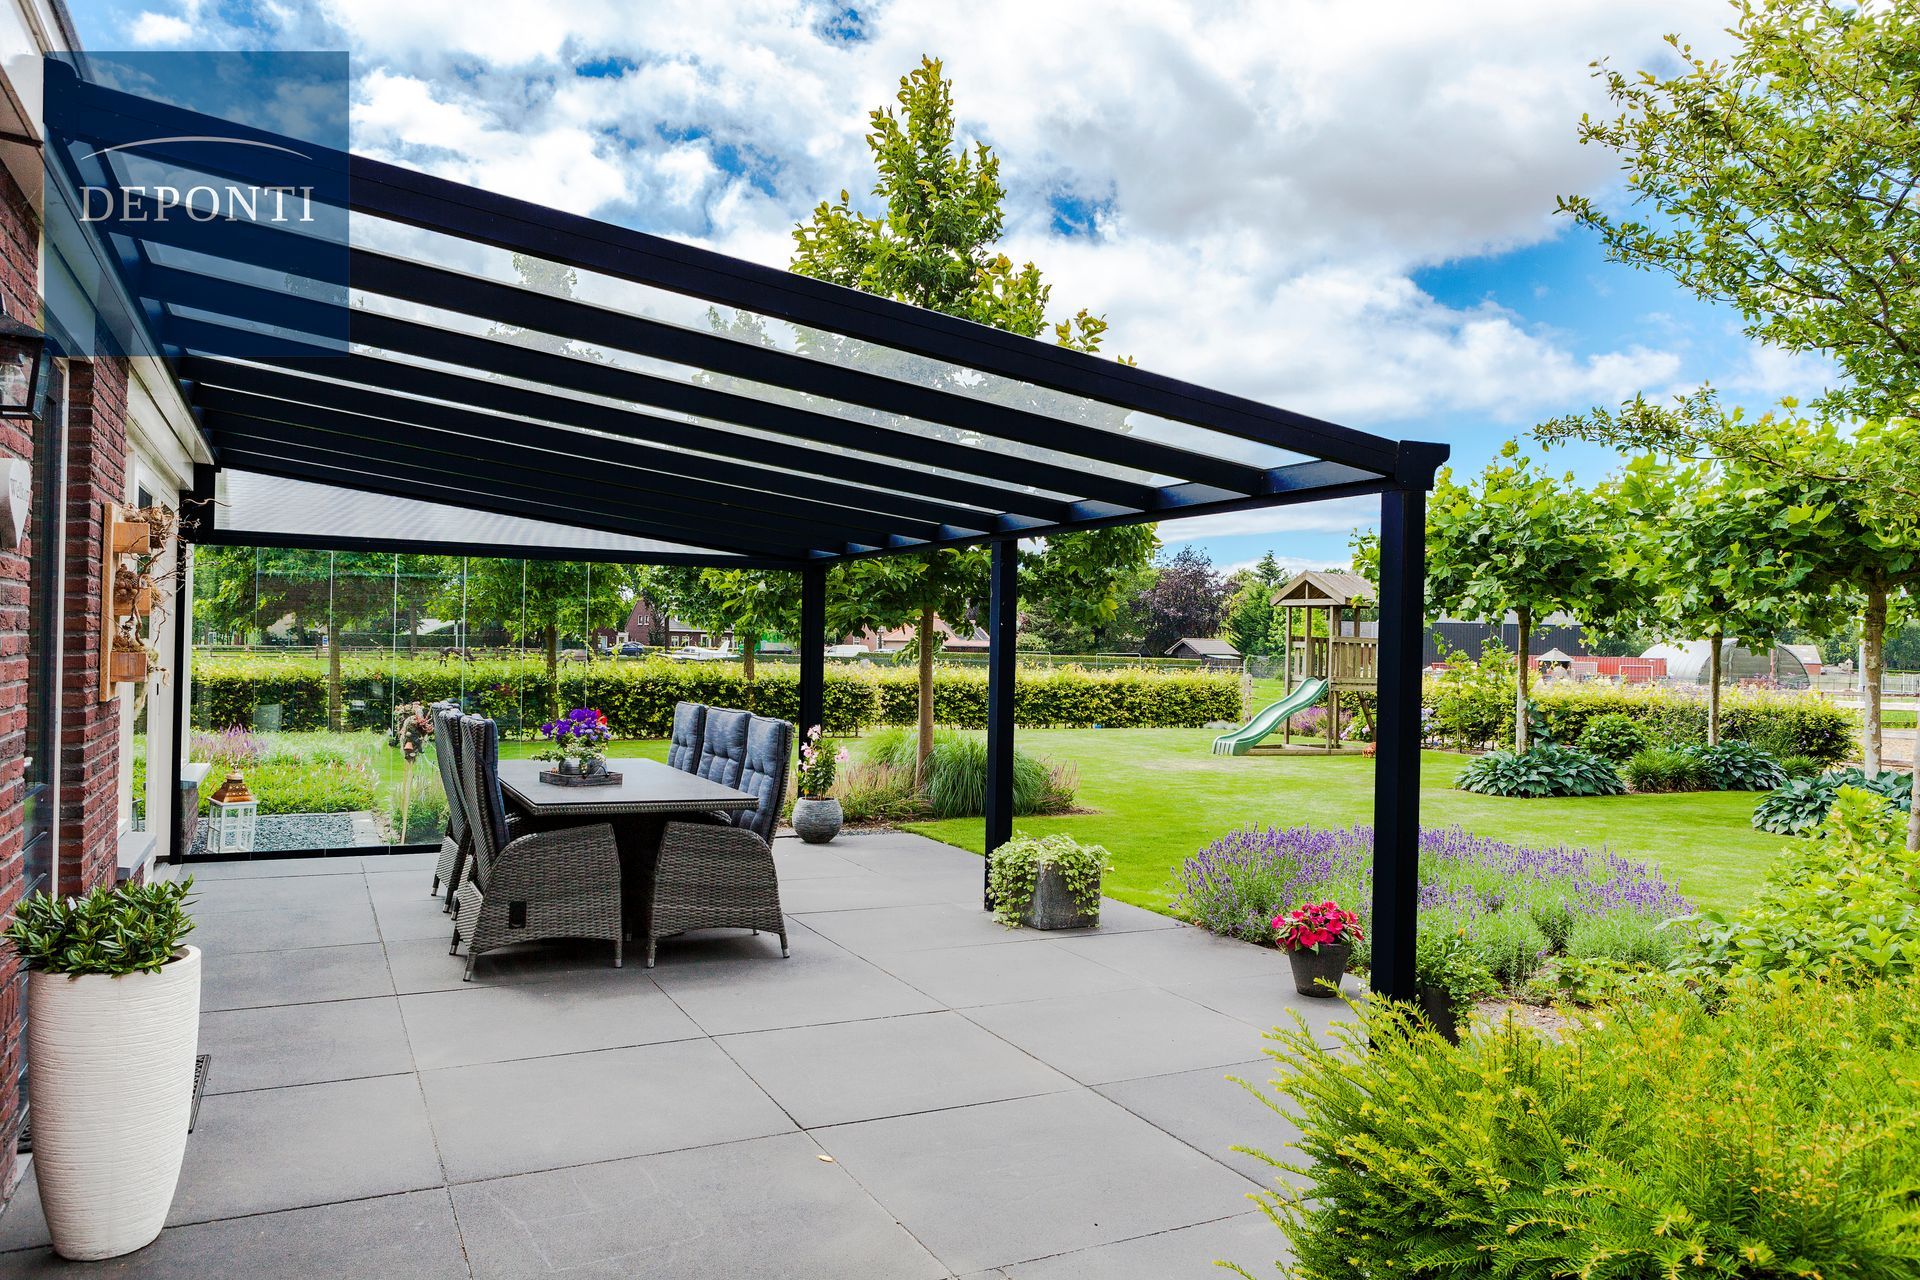 Deponti aluminium veranda with glass sliding panels to the side and a table and chairs under the canopy